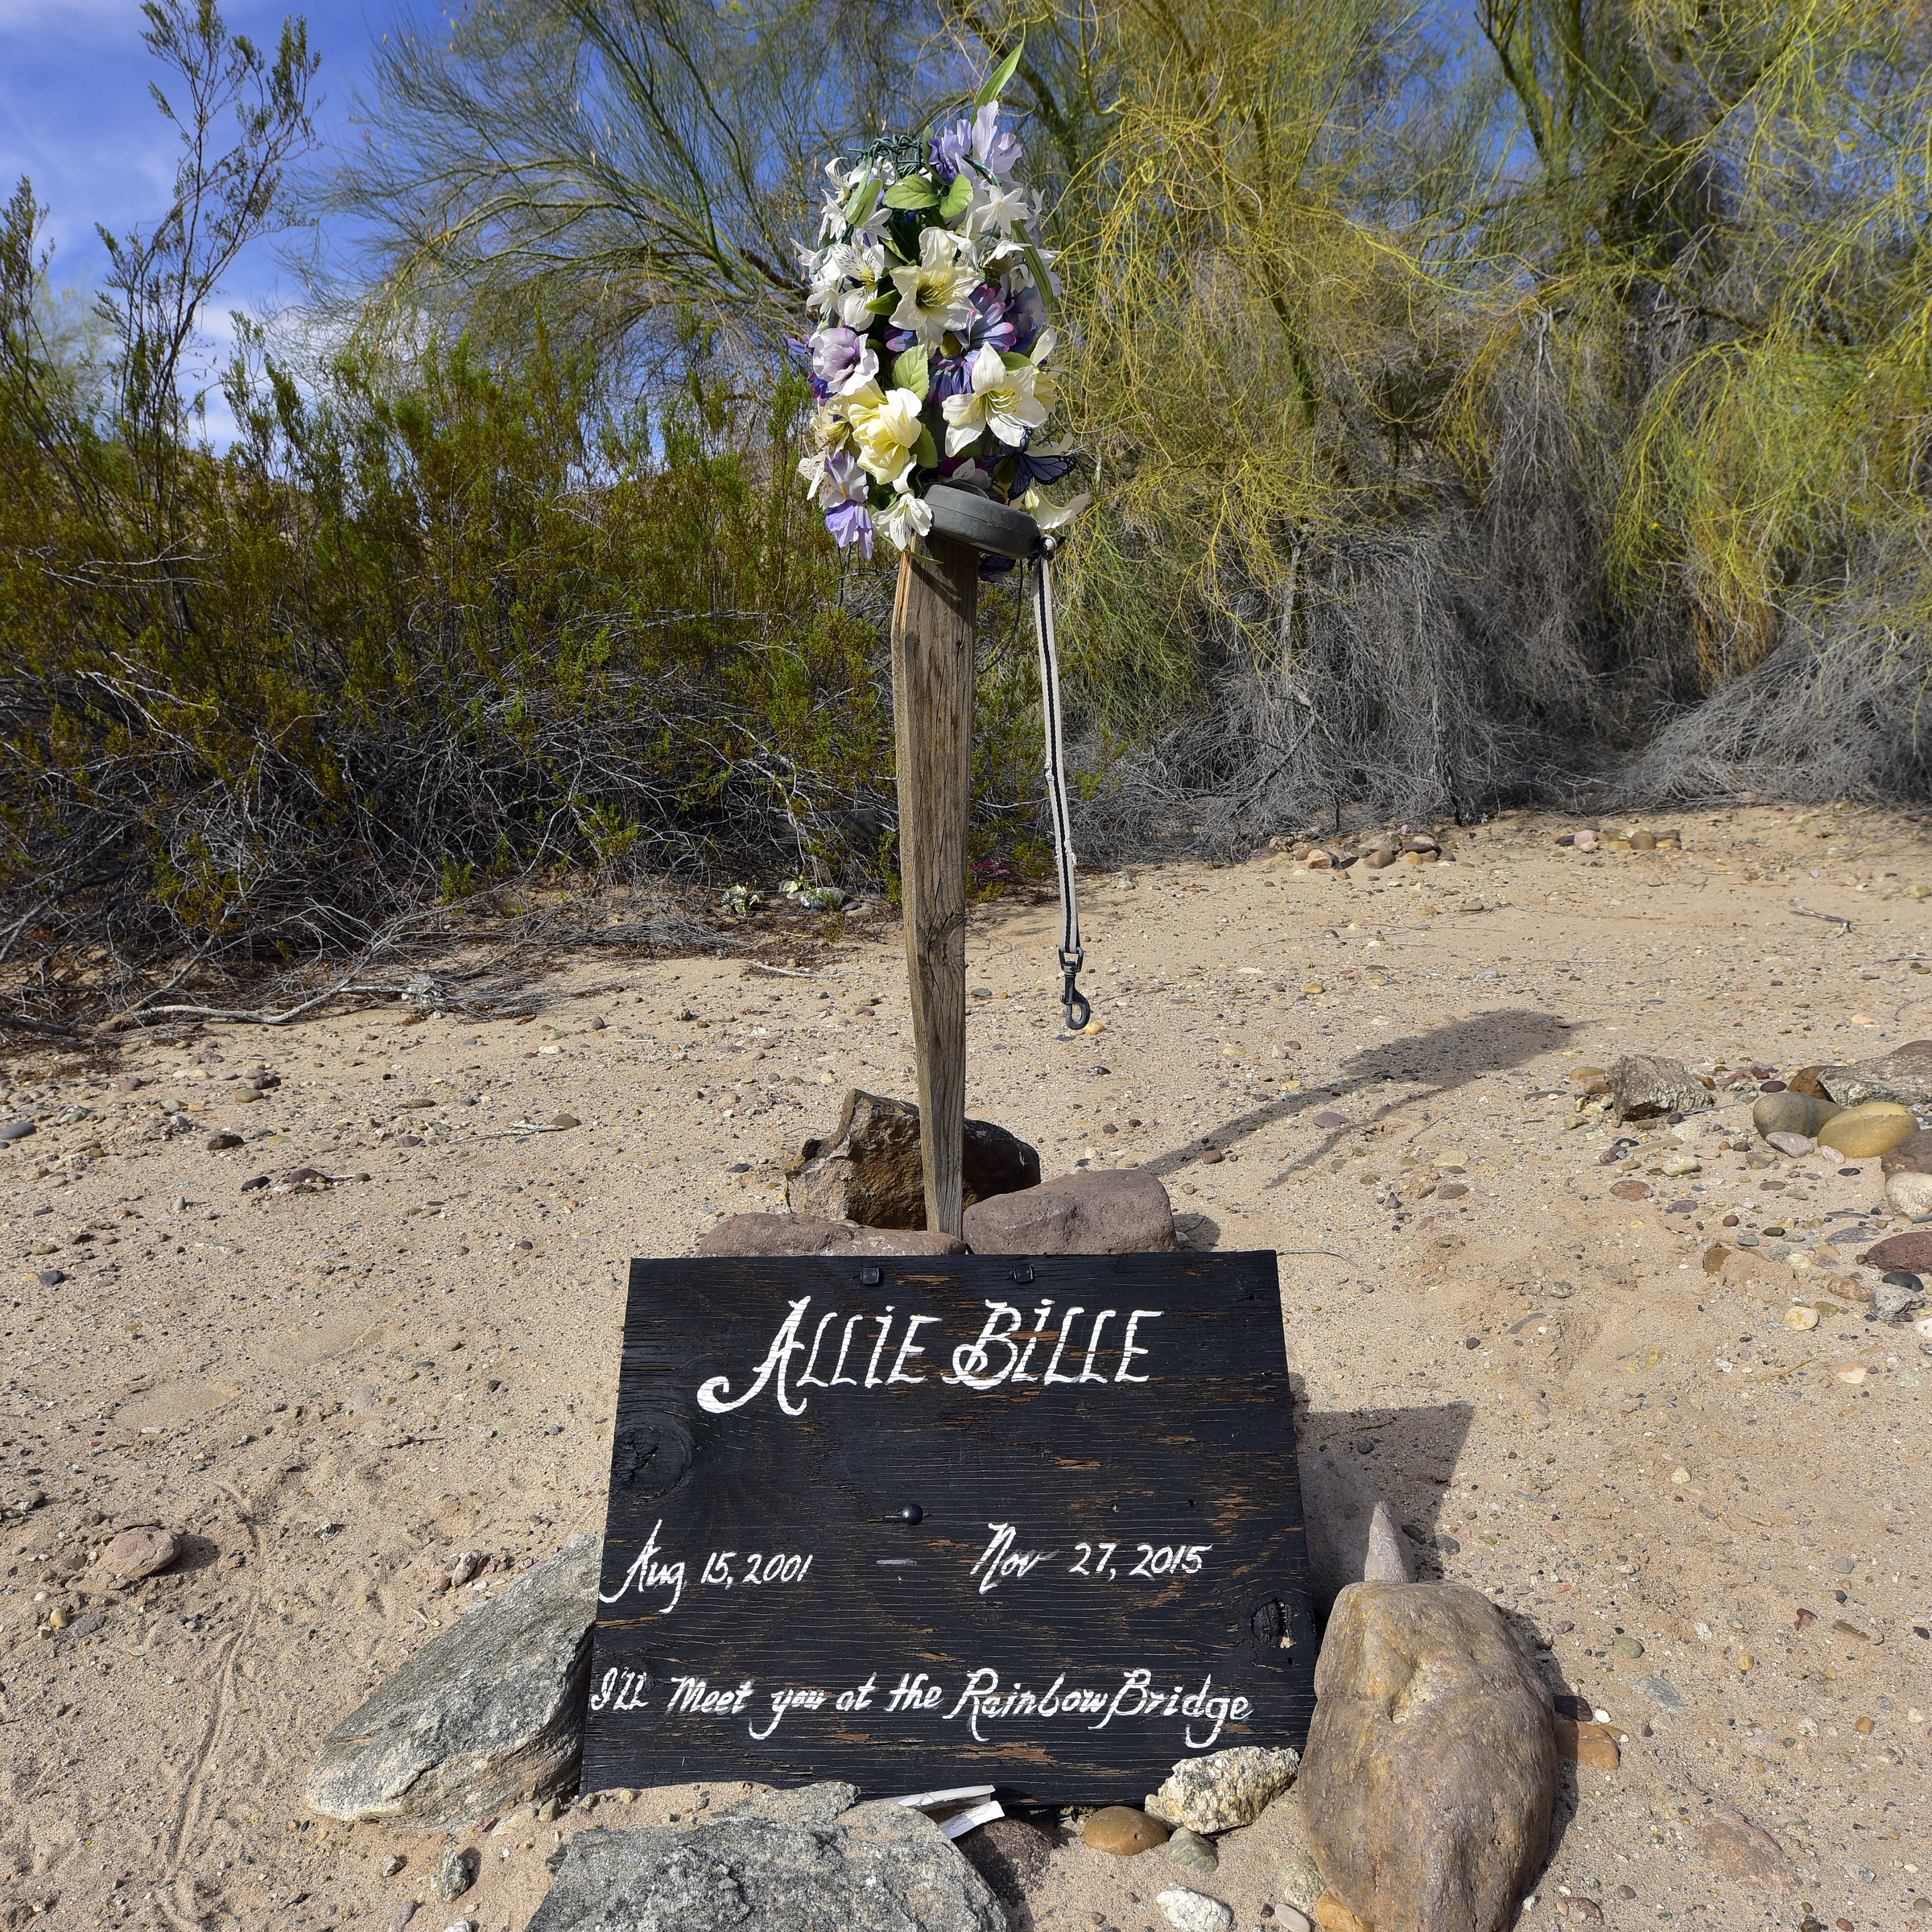 A grave in the desert marked with a wooden pole and flowers, and a marker that reads 